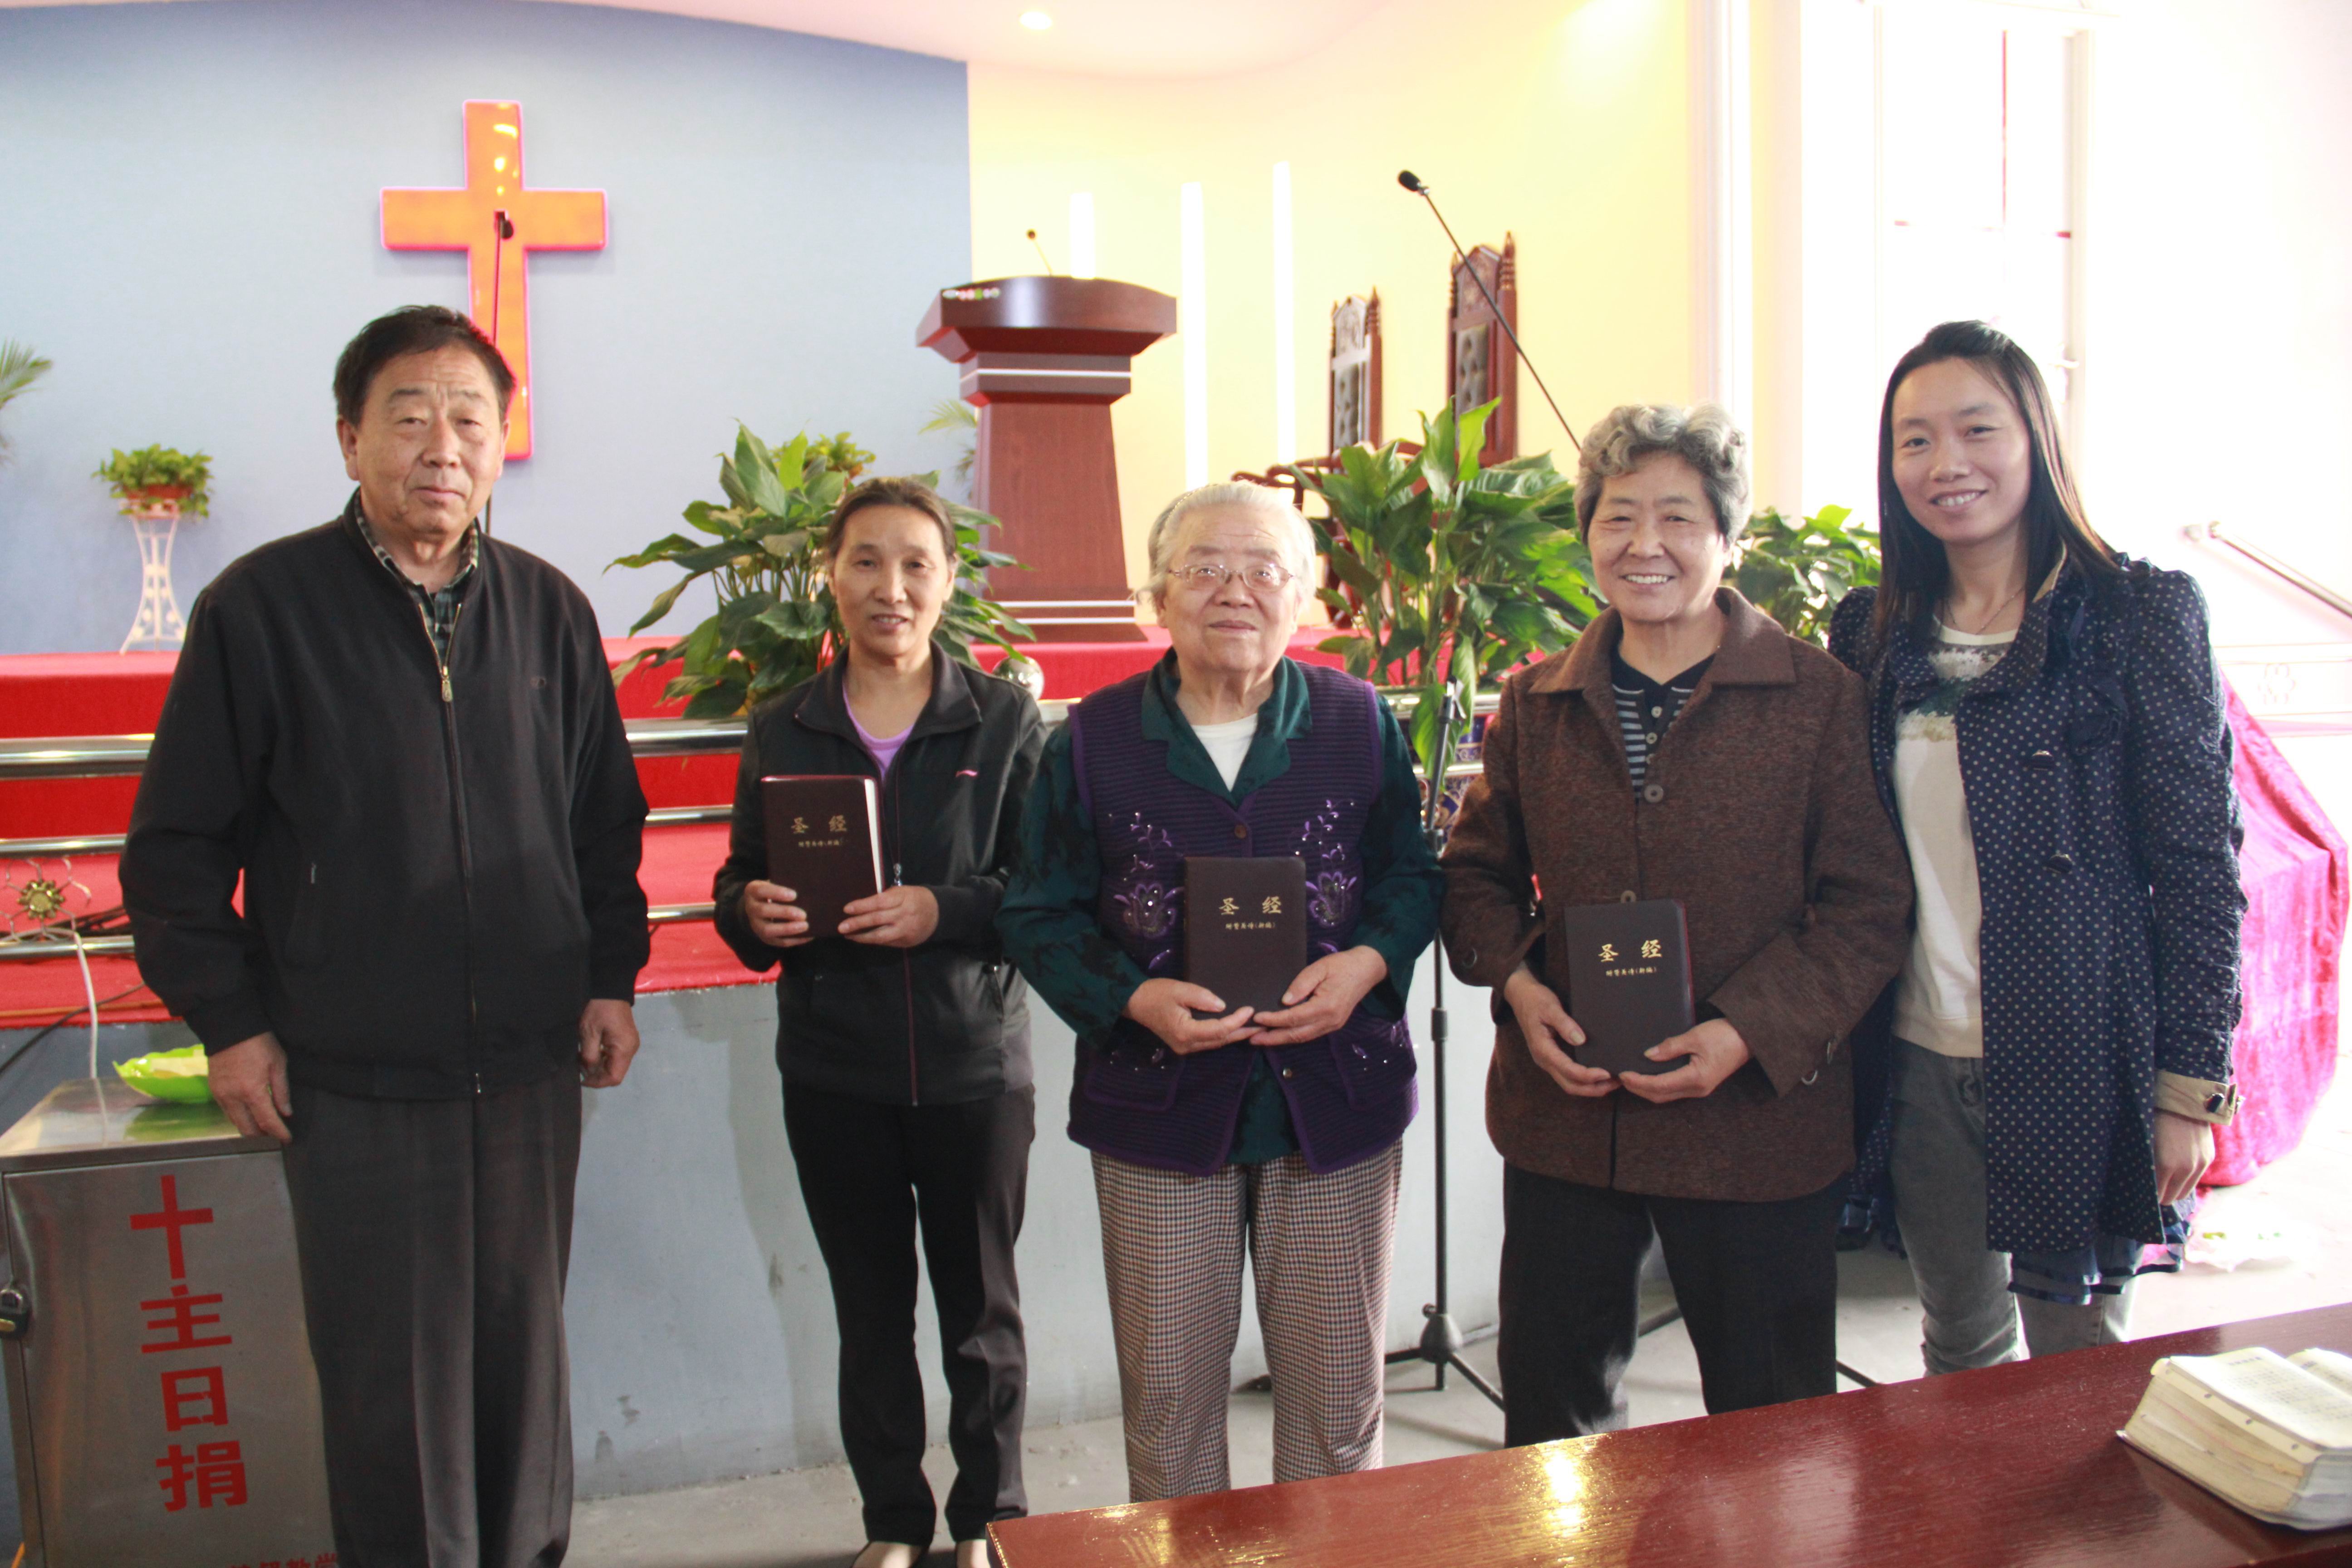 Several members of the choir received the Bible as the award